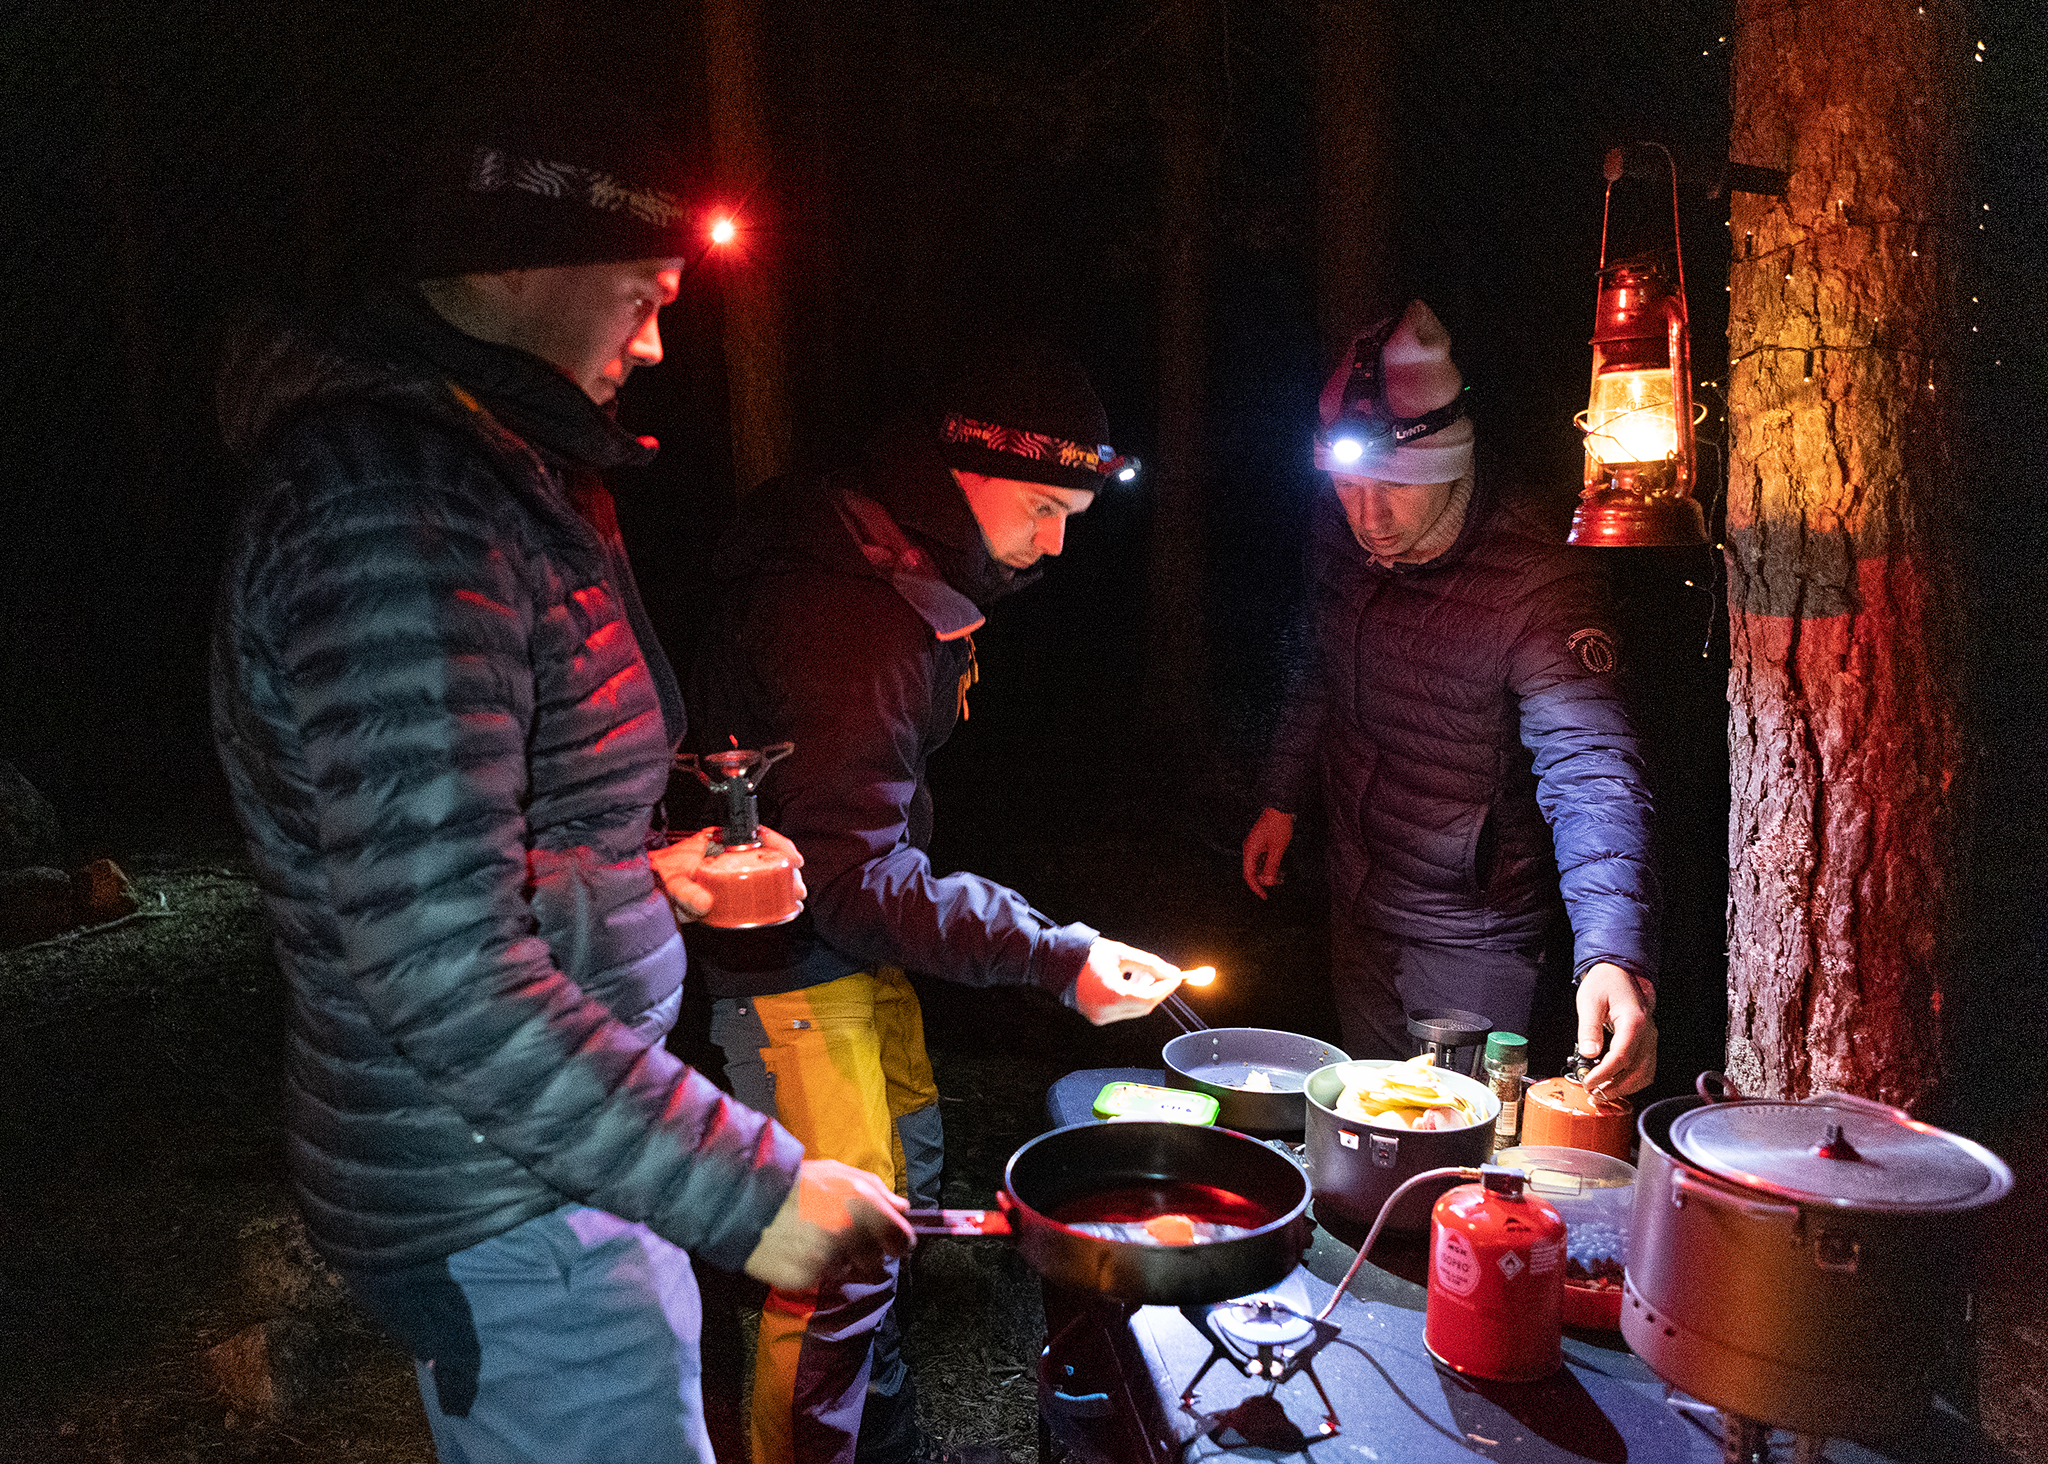 Cooking in the outdoors